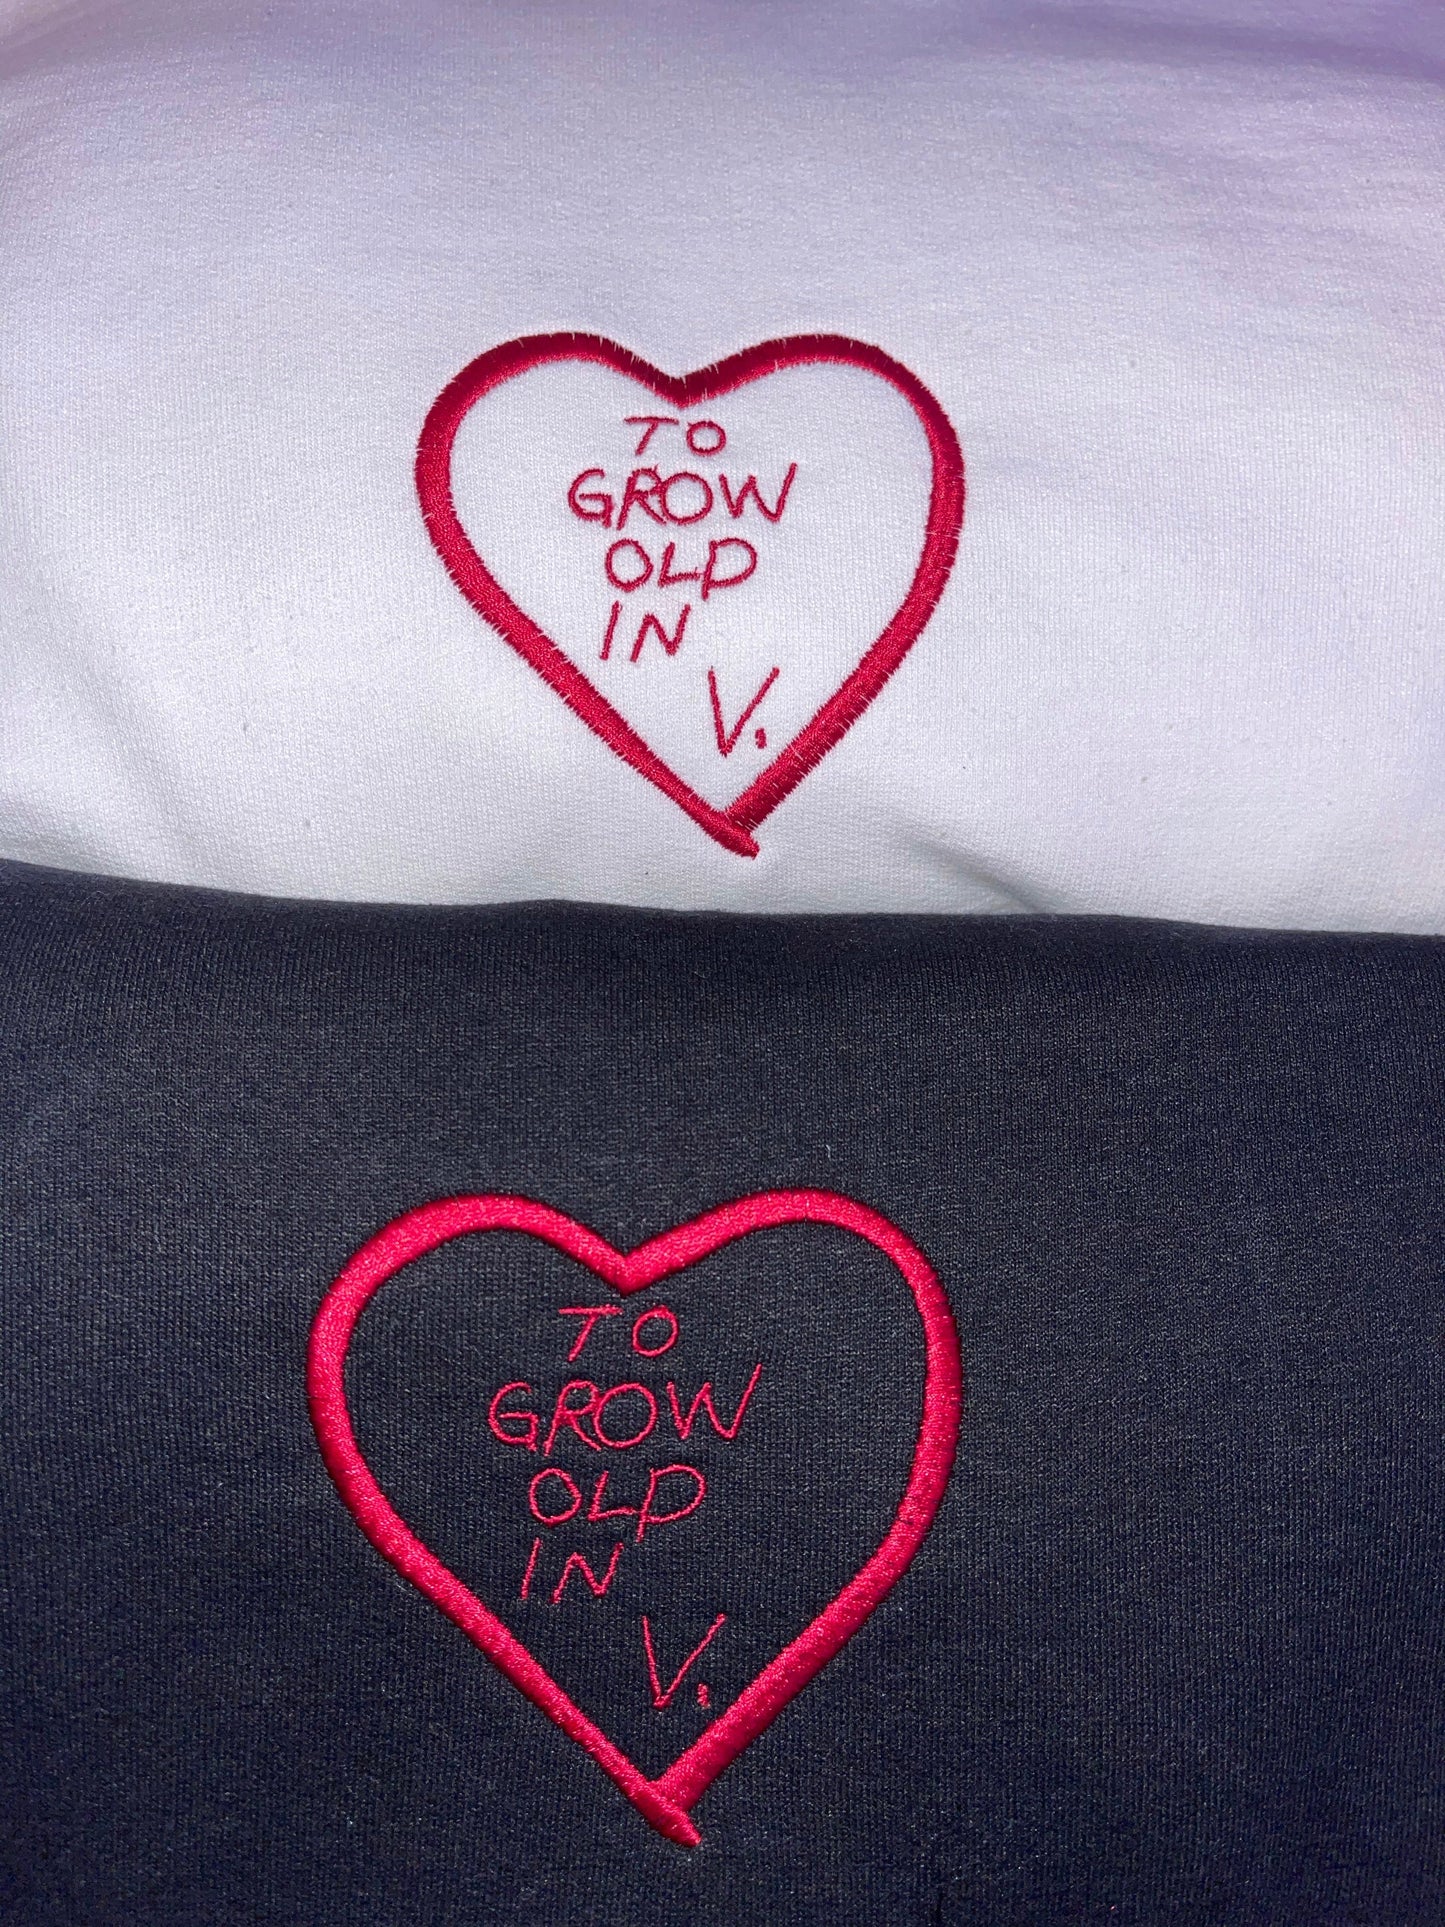 To Grow Old In embroidered pullover Sweatshirt